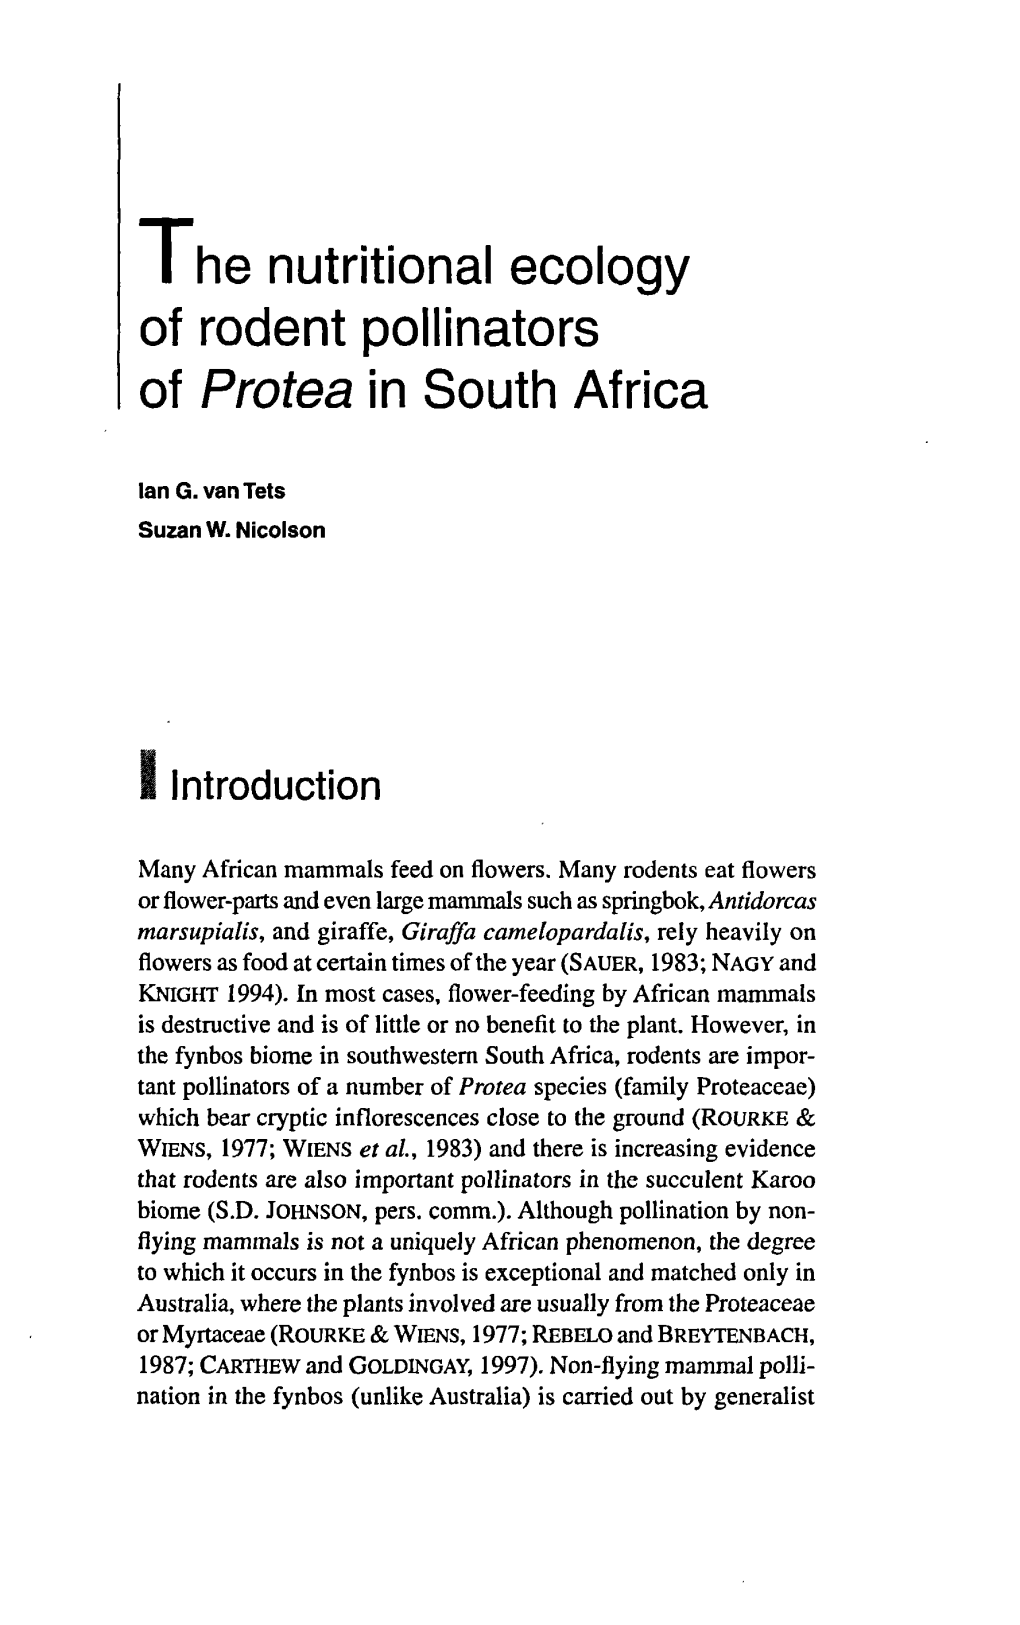 I He Nutritional Ecology of Rodent Pollinators of Protea in South Africa